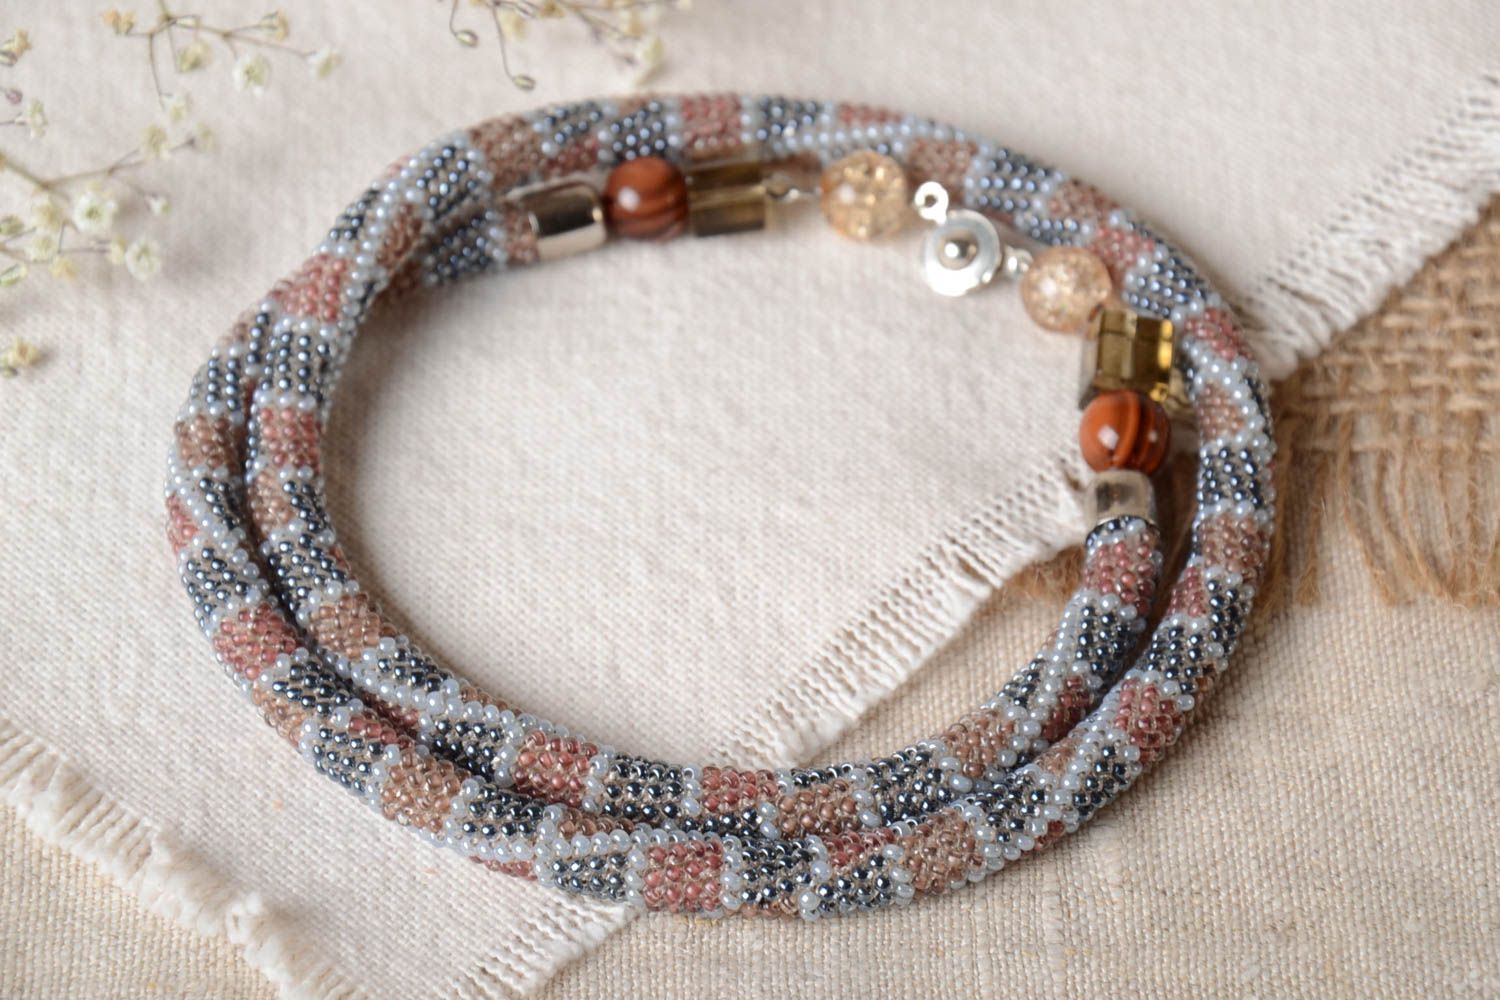 Handmade beaded cord necklace handcrafted jewelry fashion accessories gift ideas photo 1